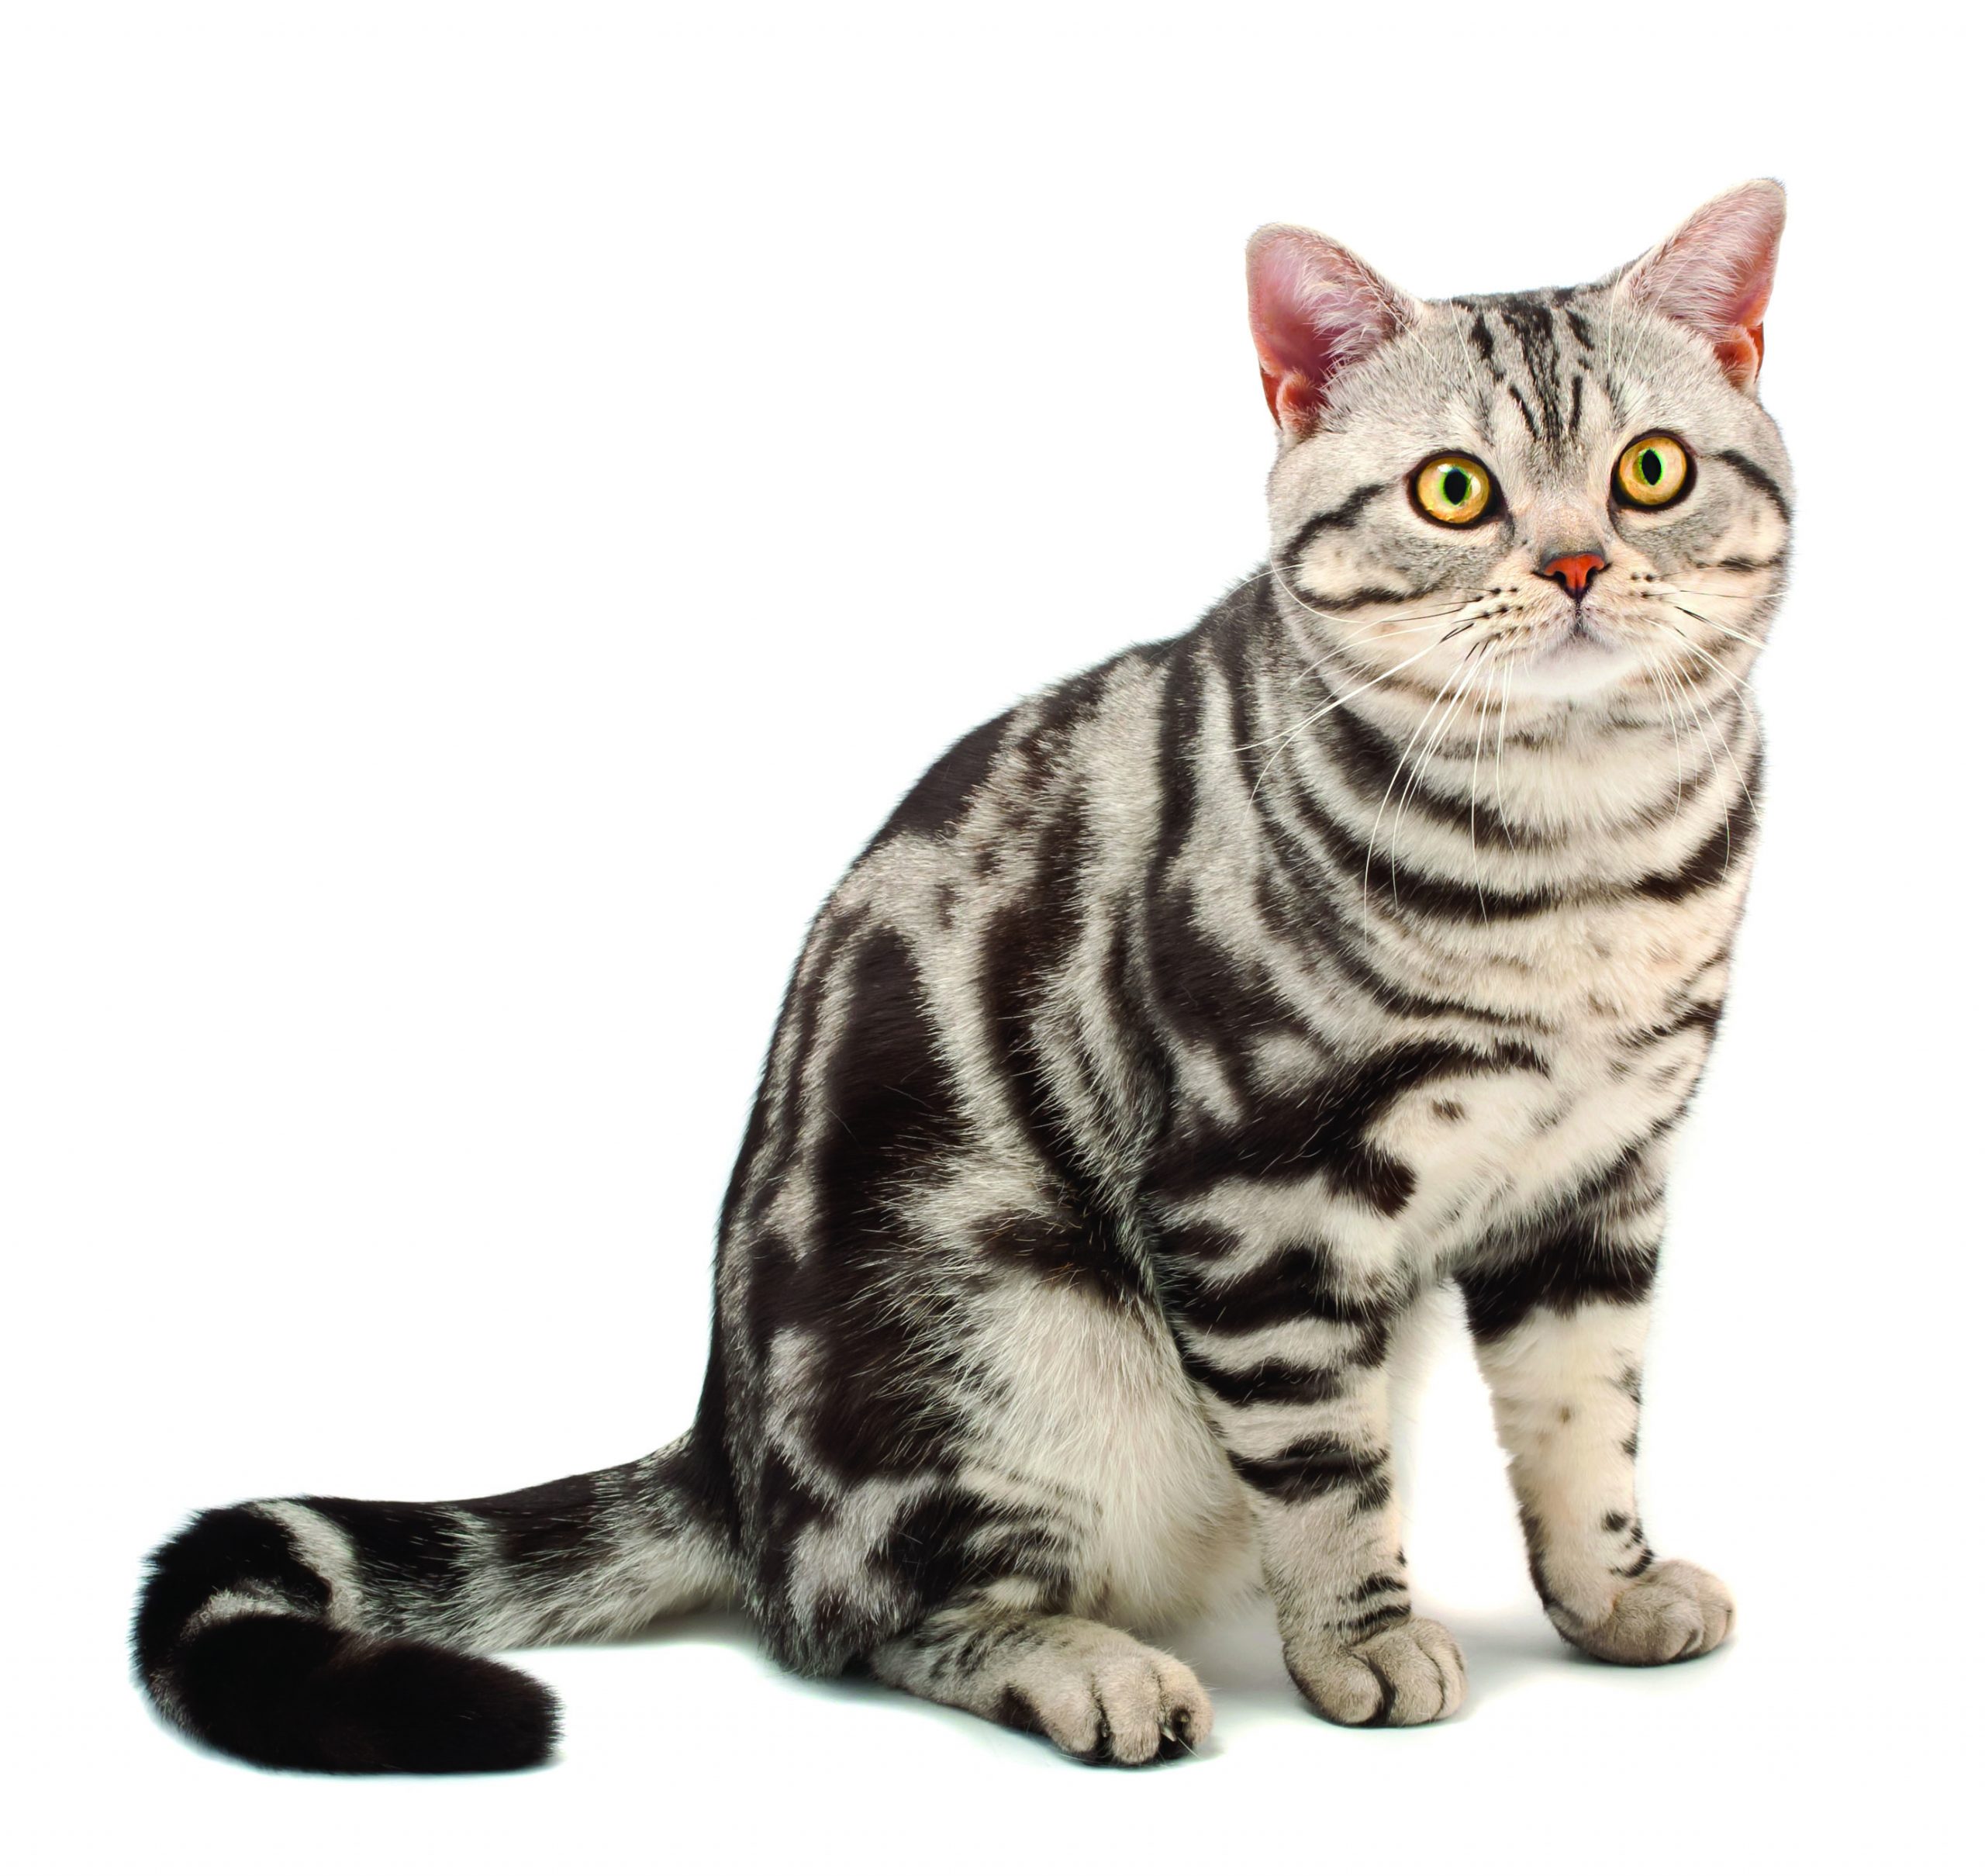 Are American Shorthair Cats Expensive: The Cost of American Shorthair Cats